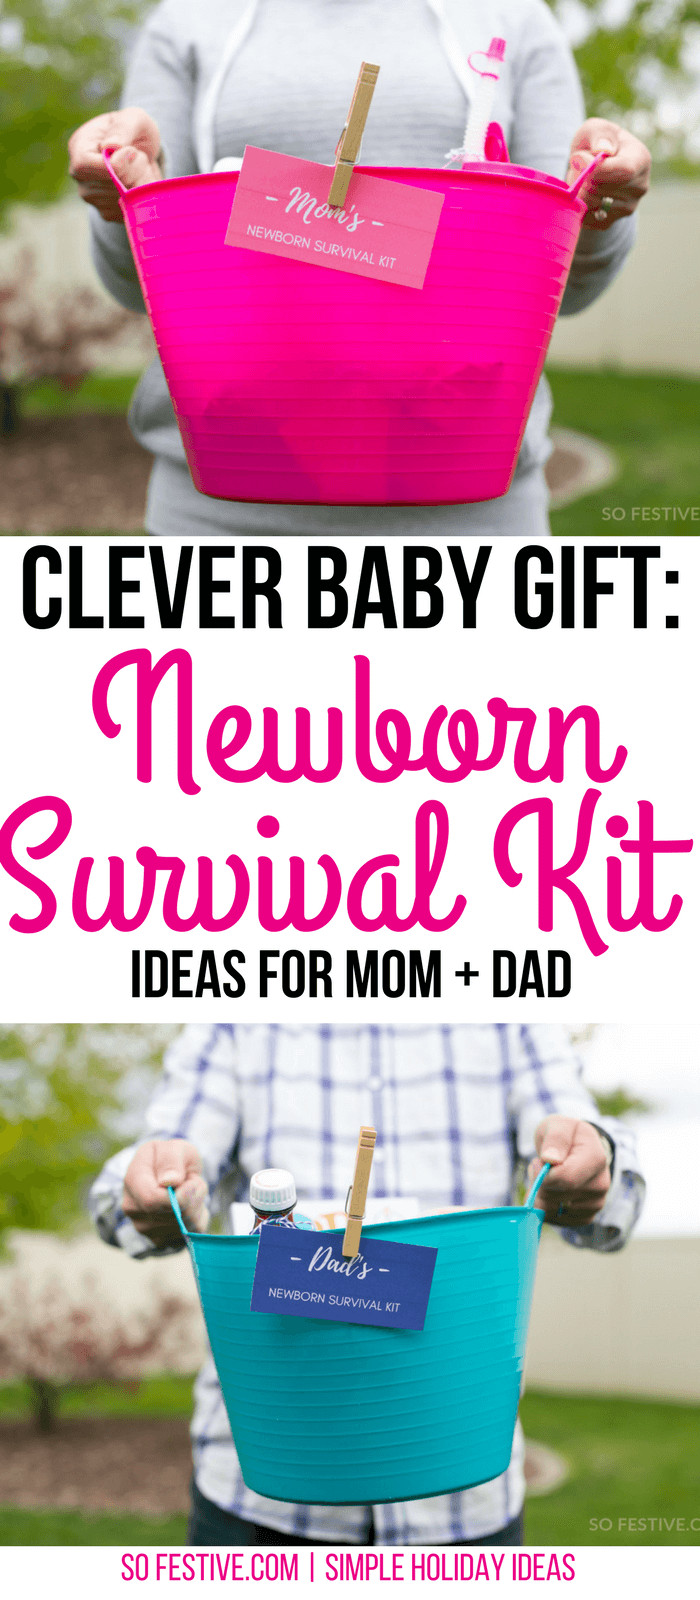 Good Baby Gift Ideas
 How to Make a Newborn Survival Kit for a Baby Shower Gift